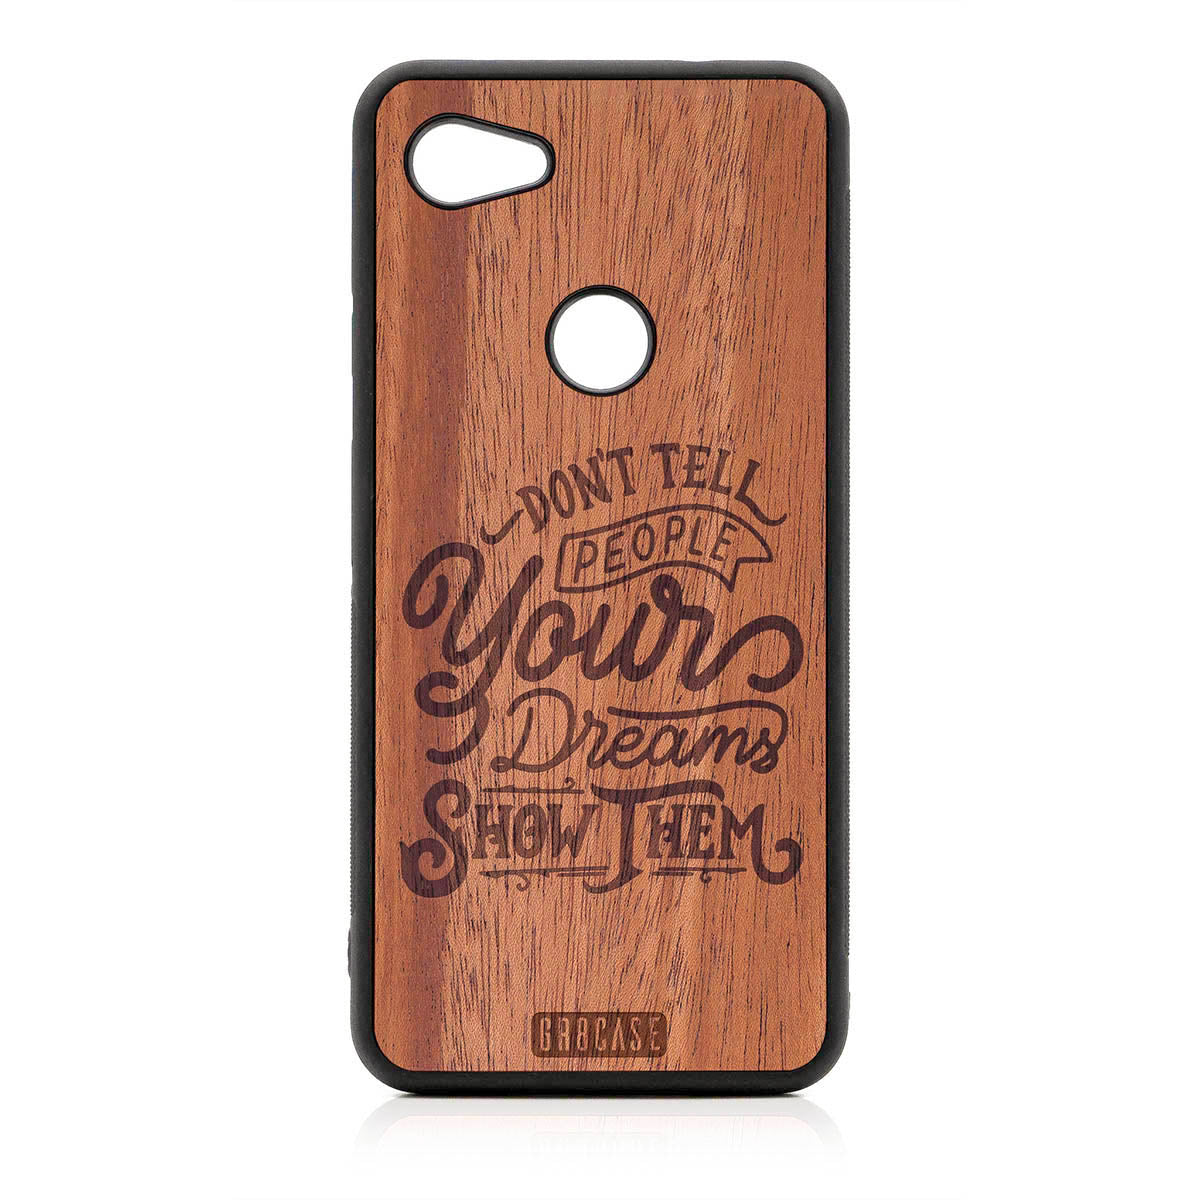 Don't Tell People Your Dreams Show Them Design Wood Case For Google Pixel 3A by GR8CASE